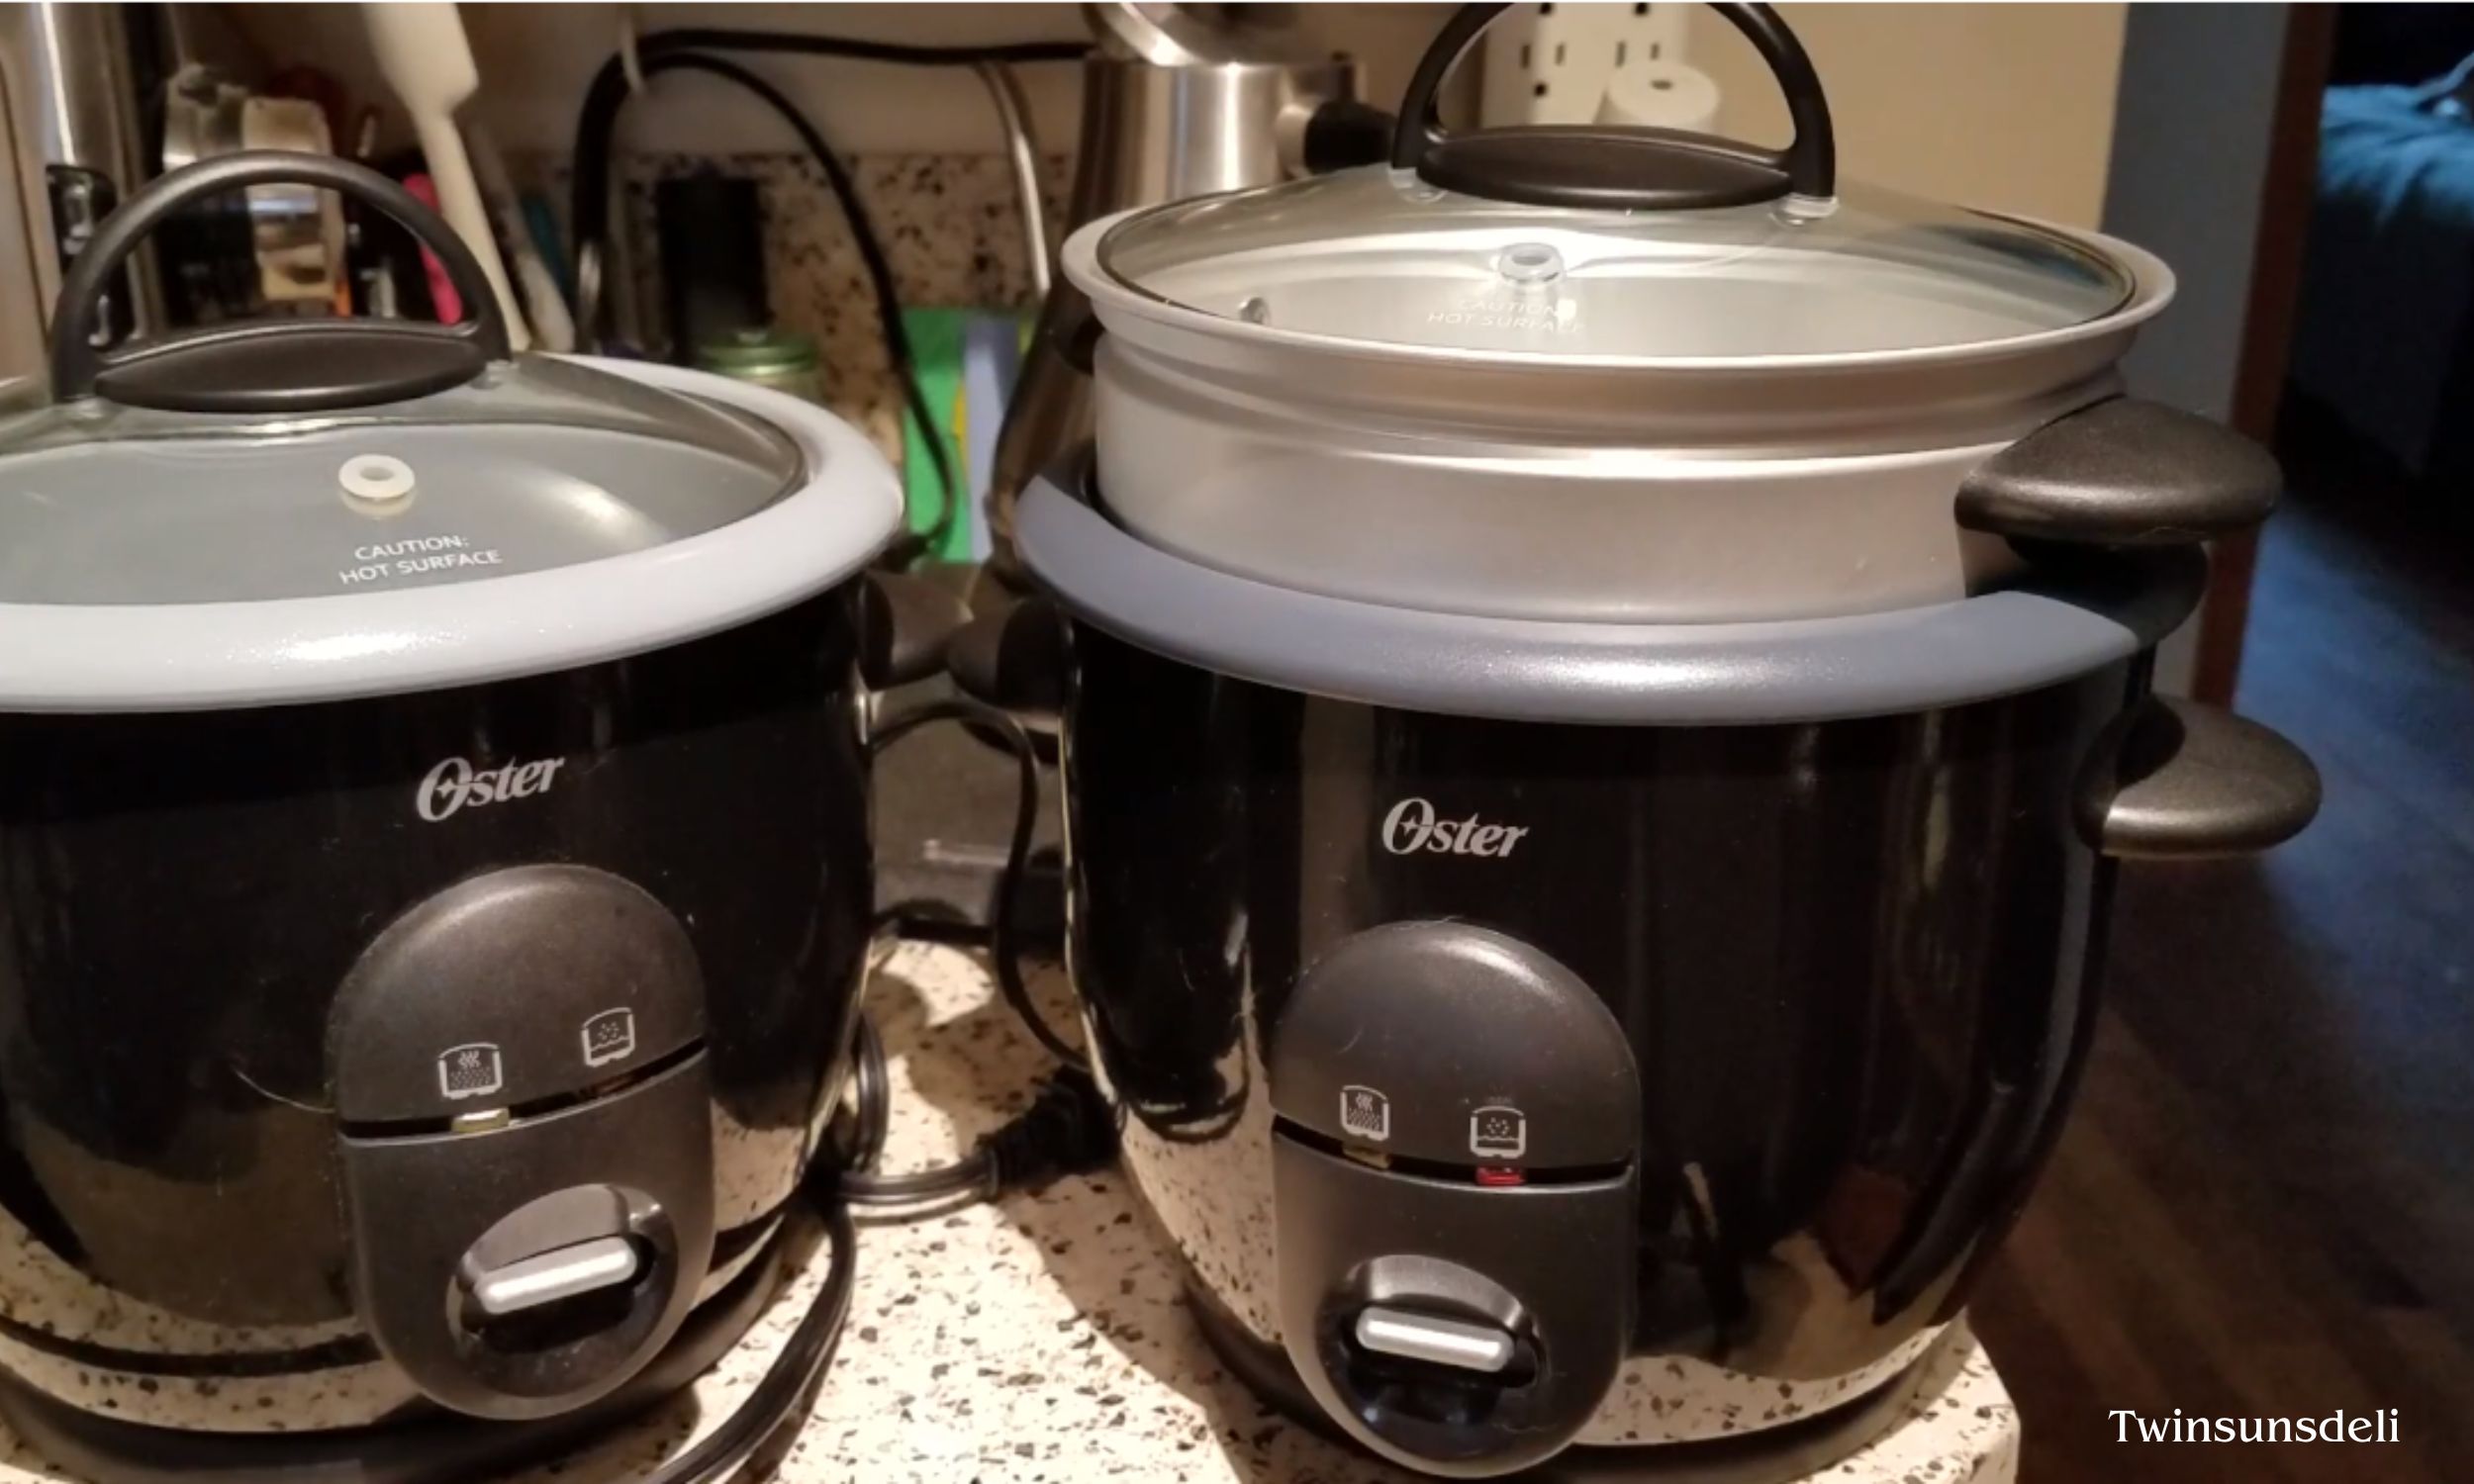 Oster rice cooker instructions